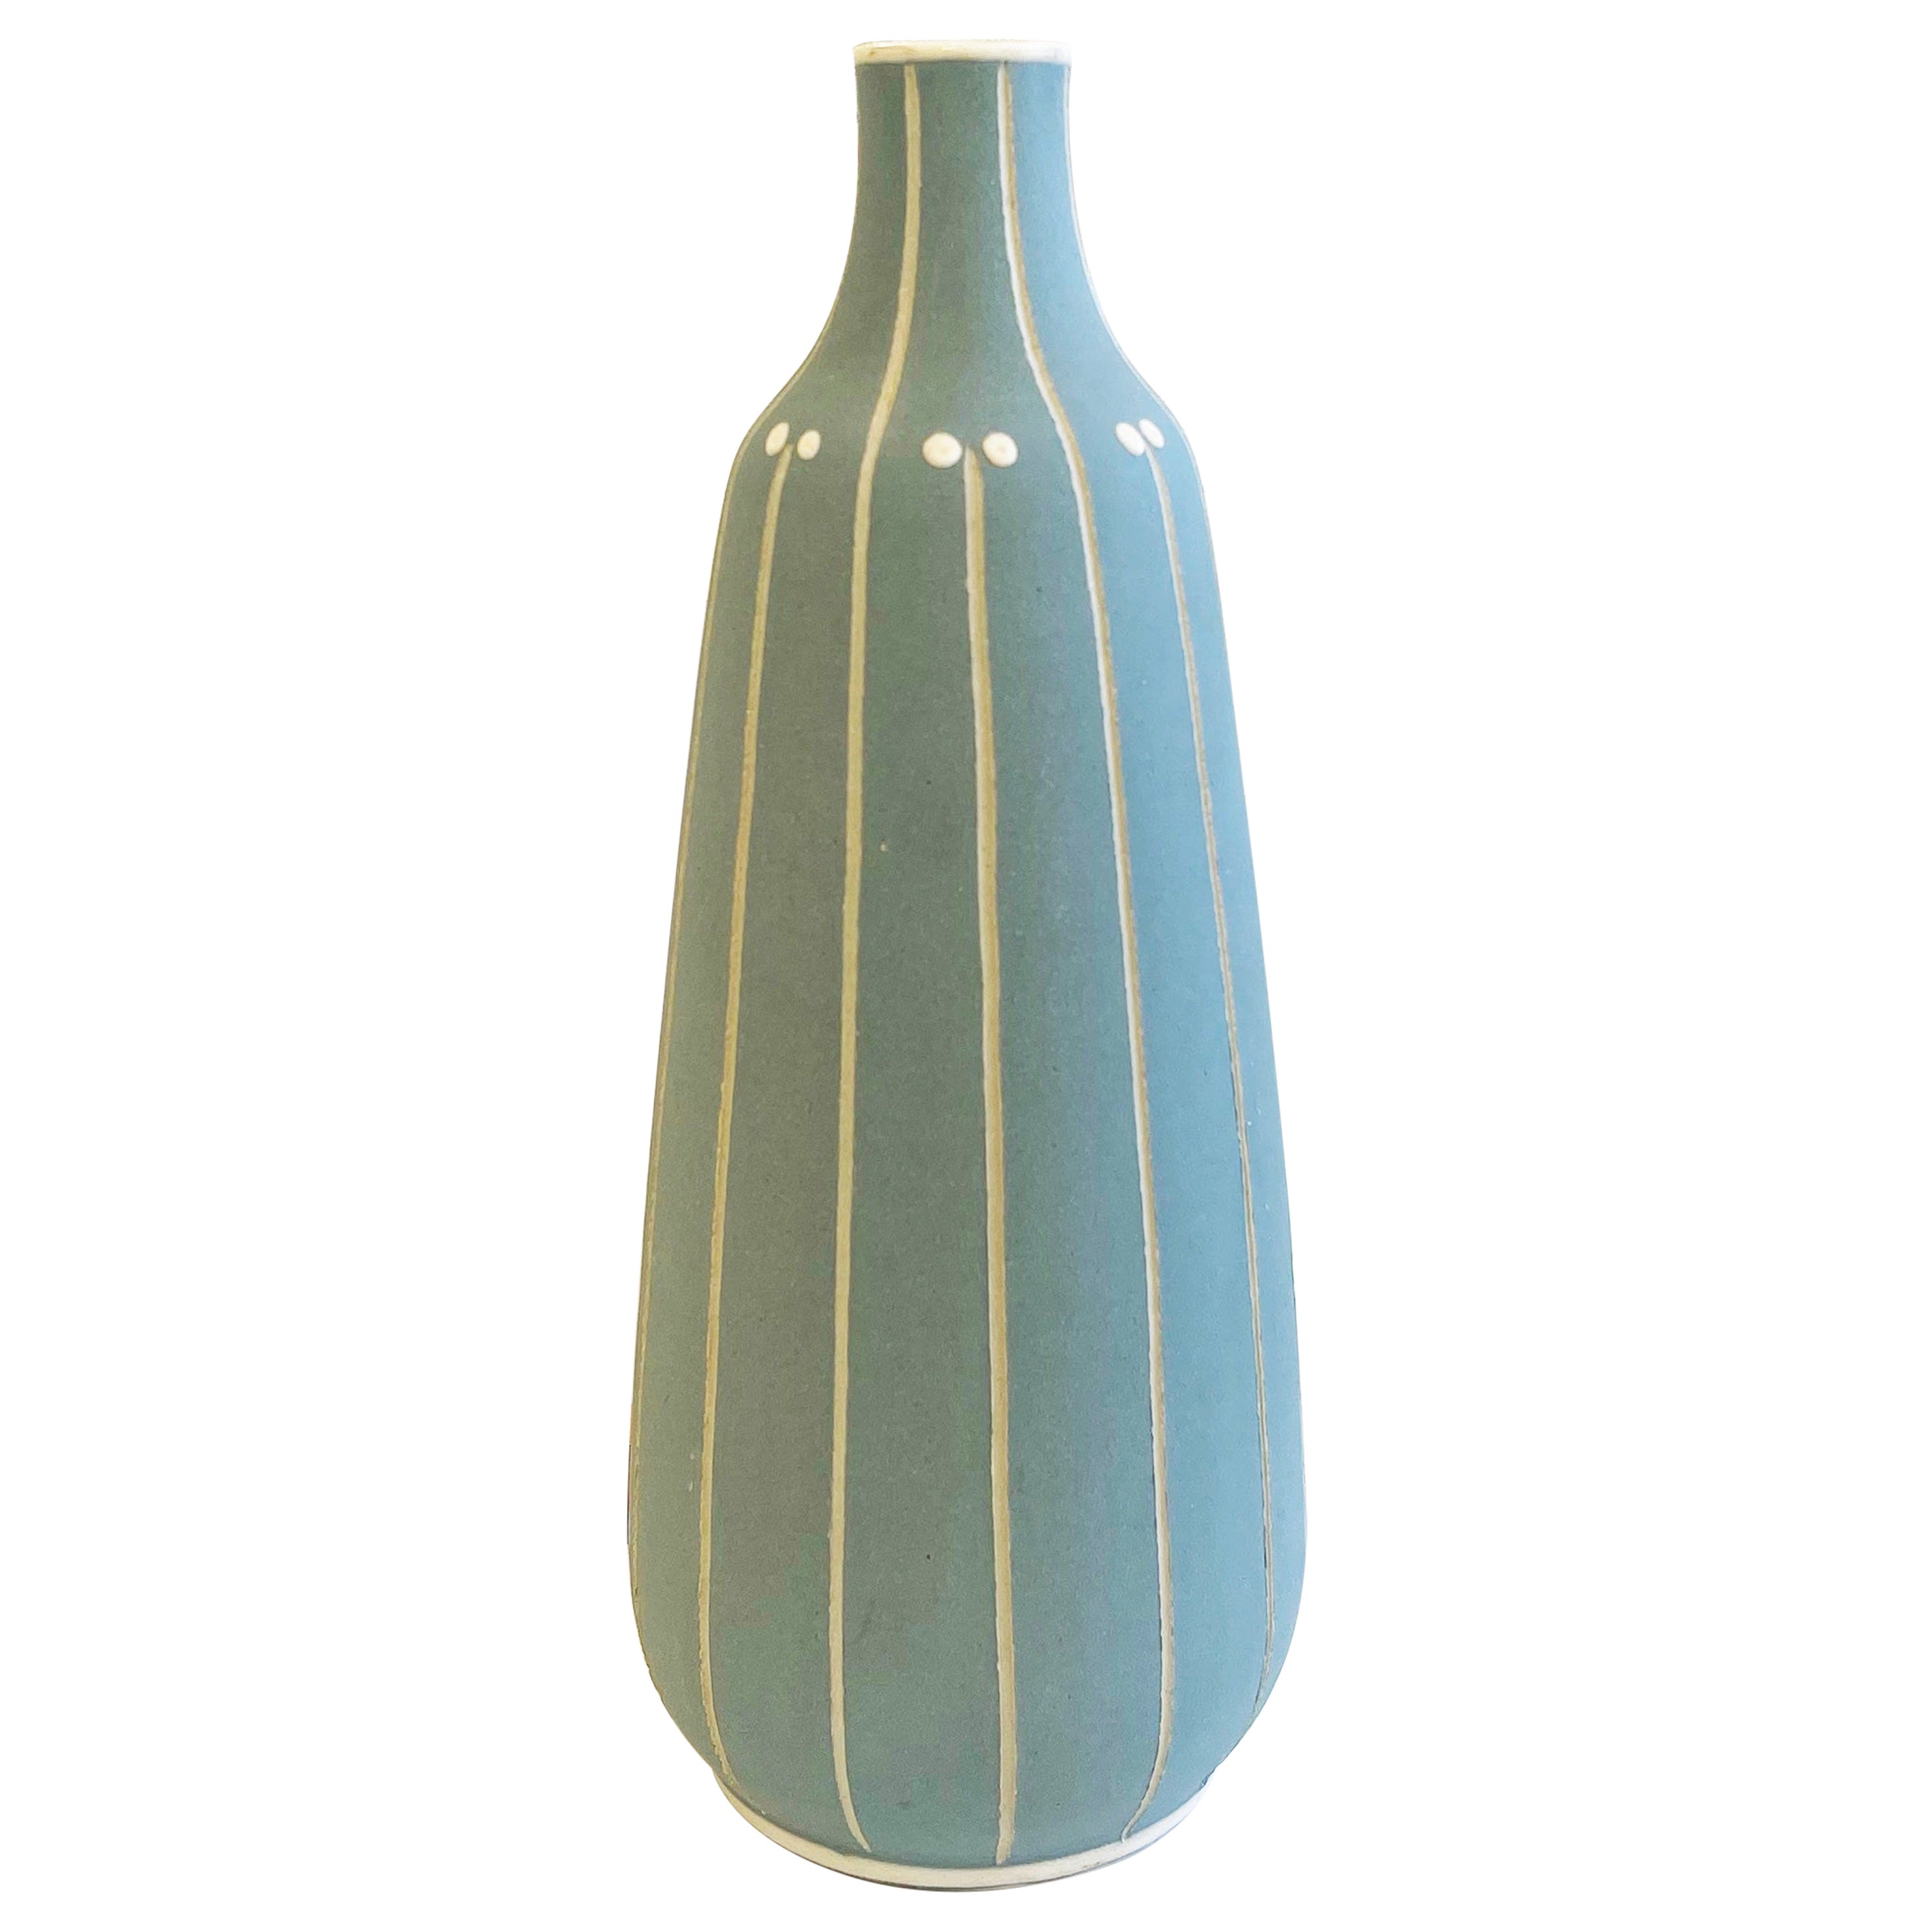 Art Deco Vase by Carl Fischer Incised Decor, Pastel Turquoise, 1920's, Germany